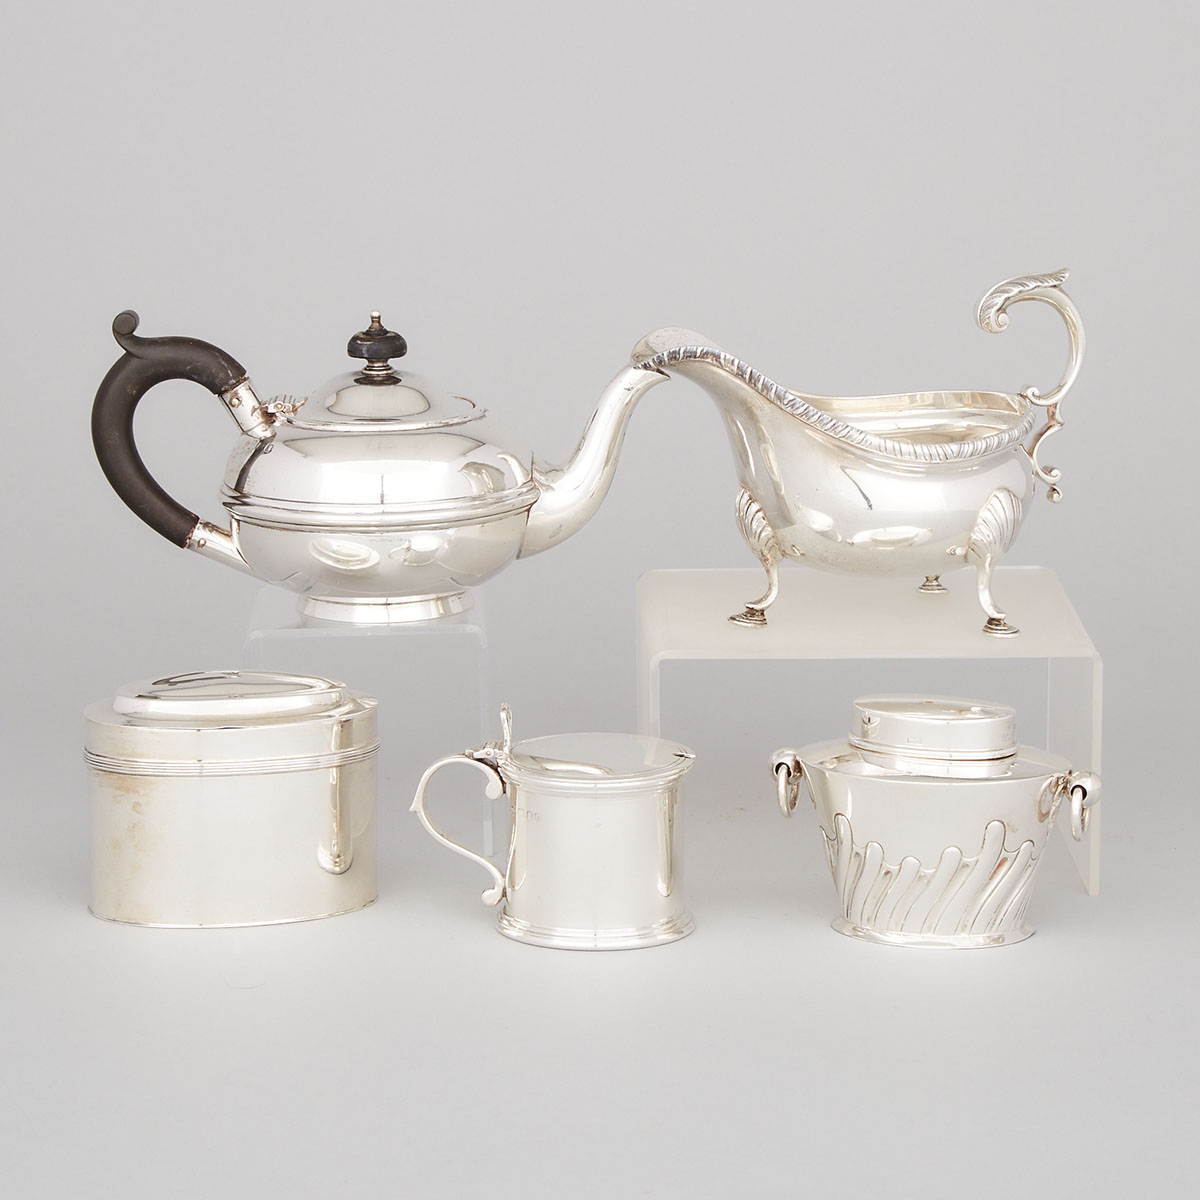 English Silver Sauce Boat, Small Teapot, Mustard Pot and Two Tea Caddies, 20th century